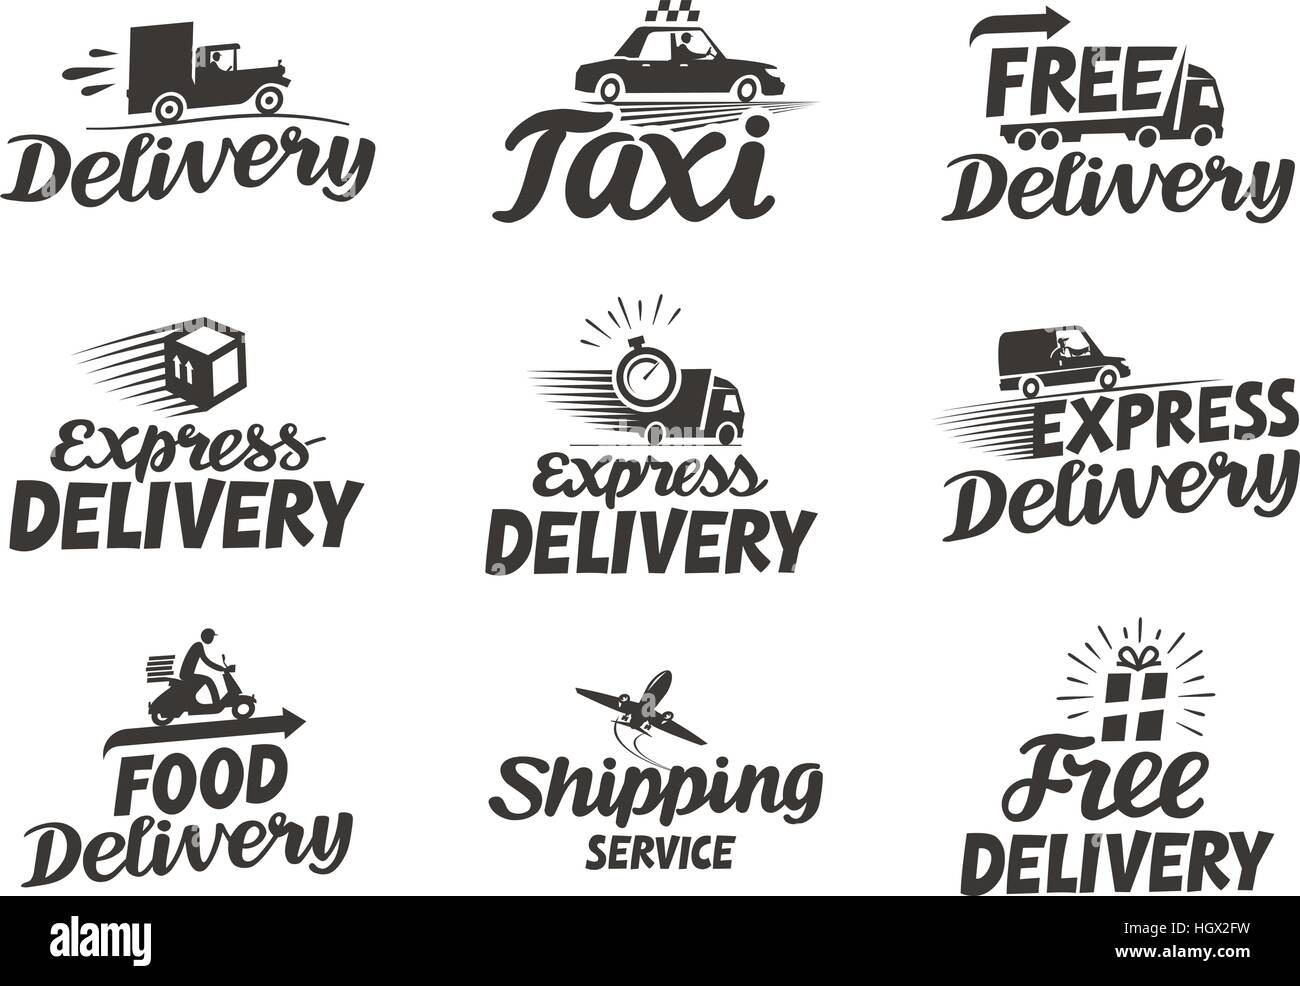 Simple yellow and black pizza logos for delivery, bakery, product